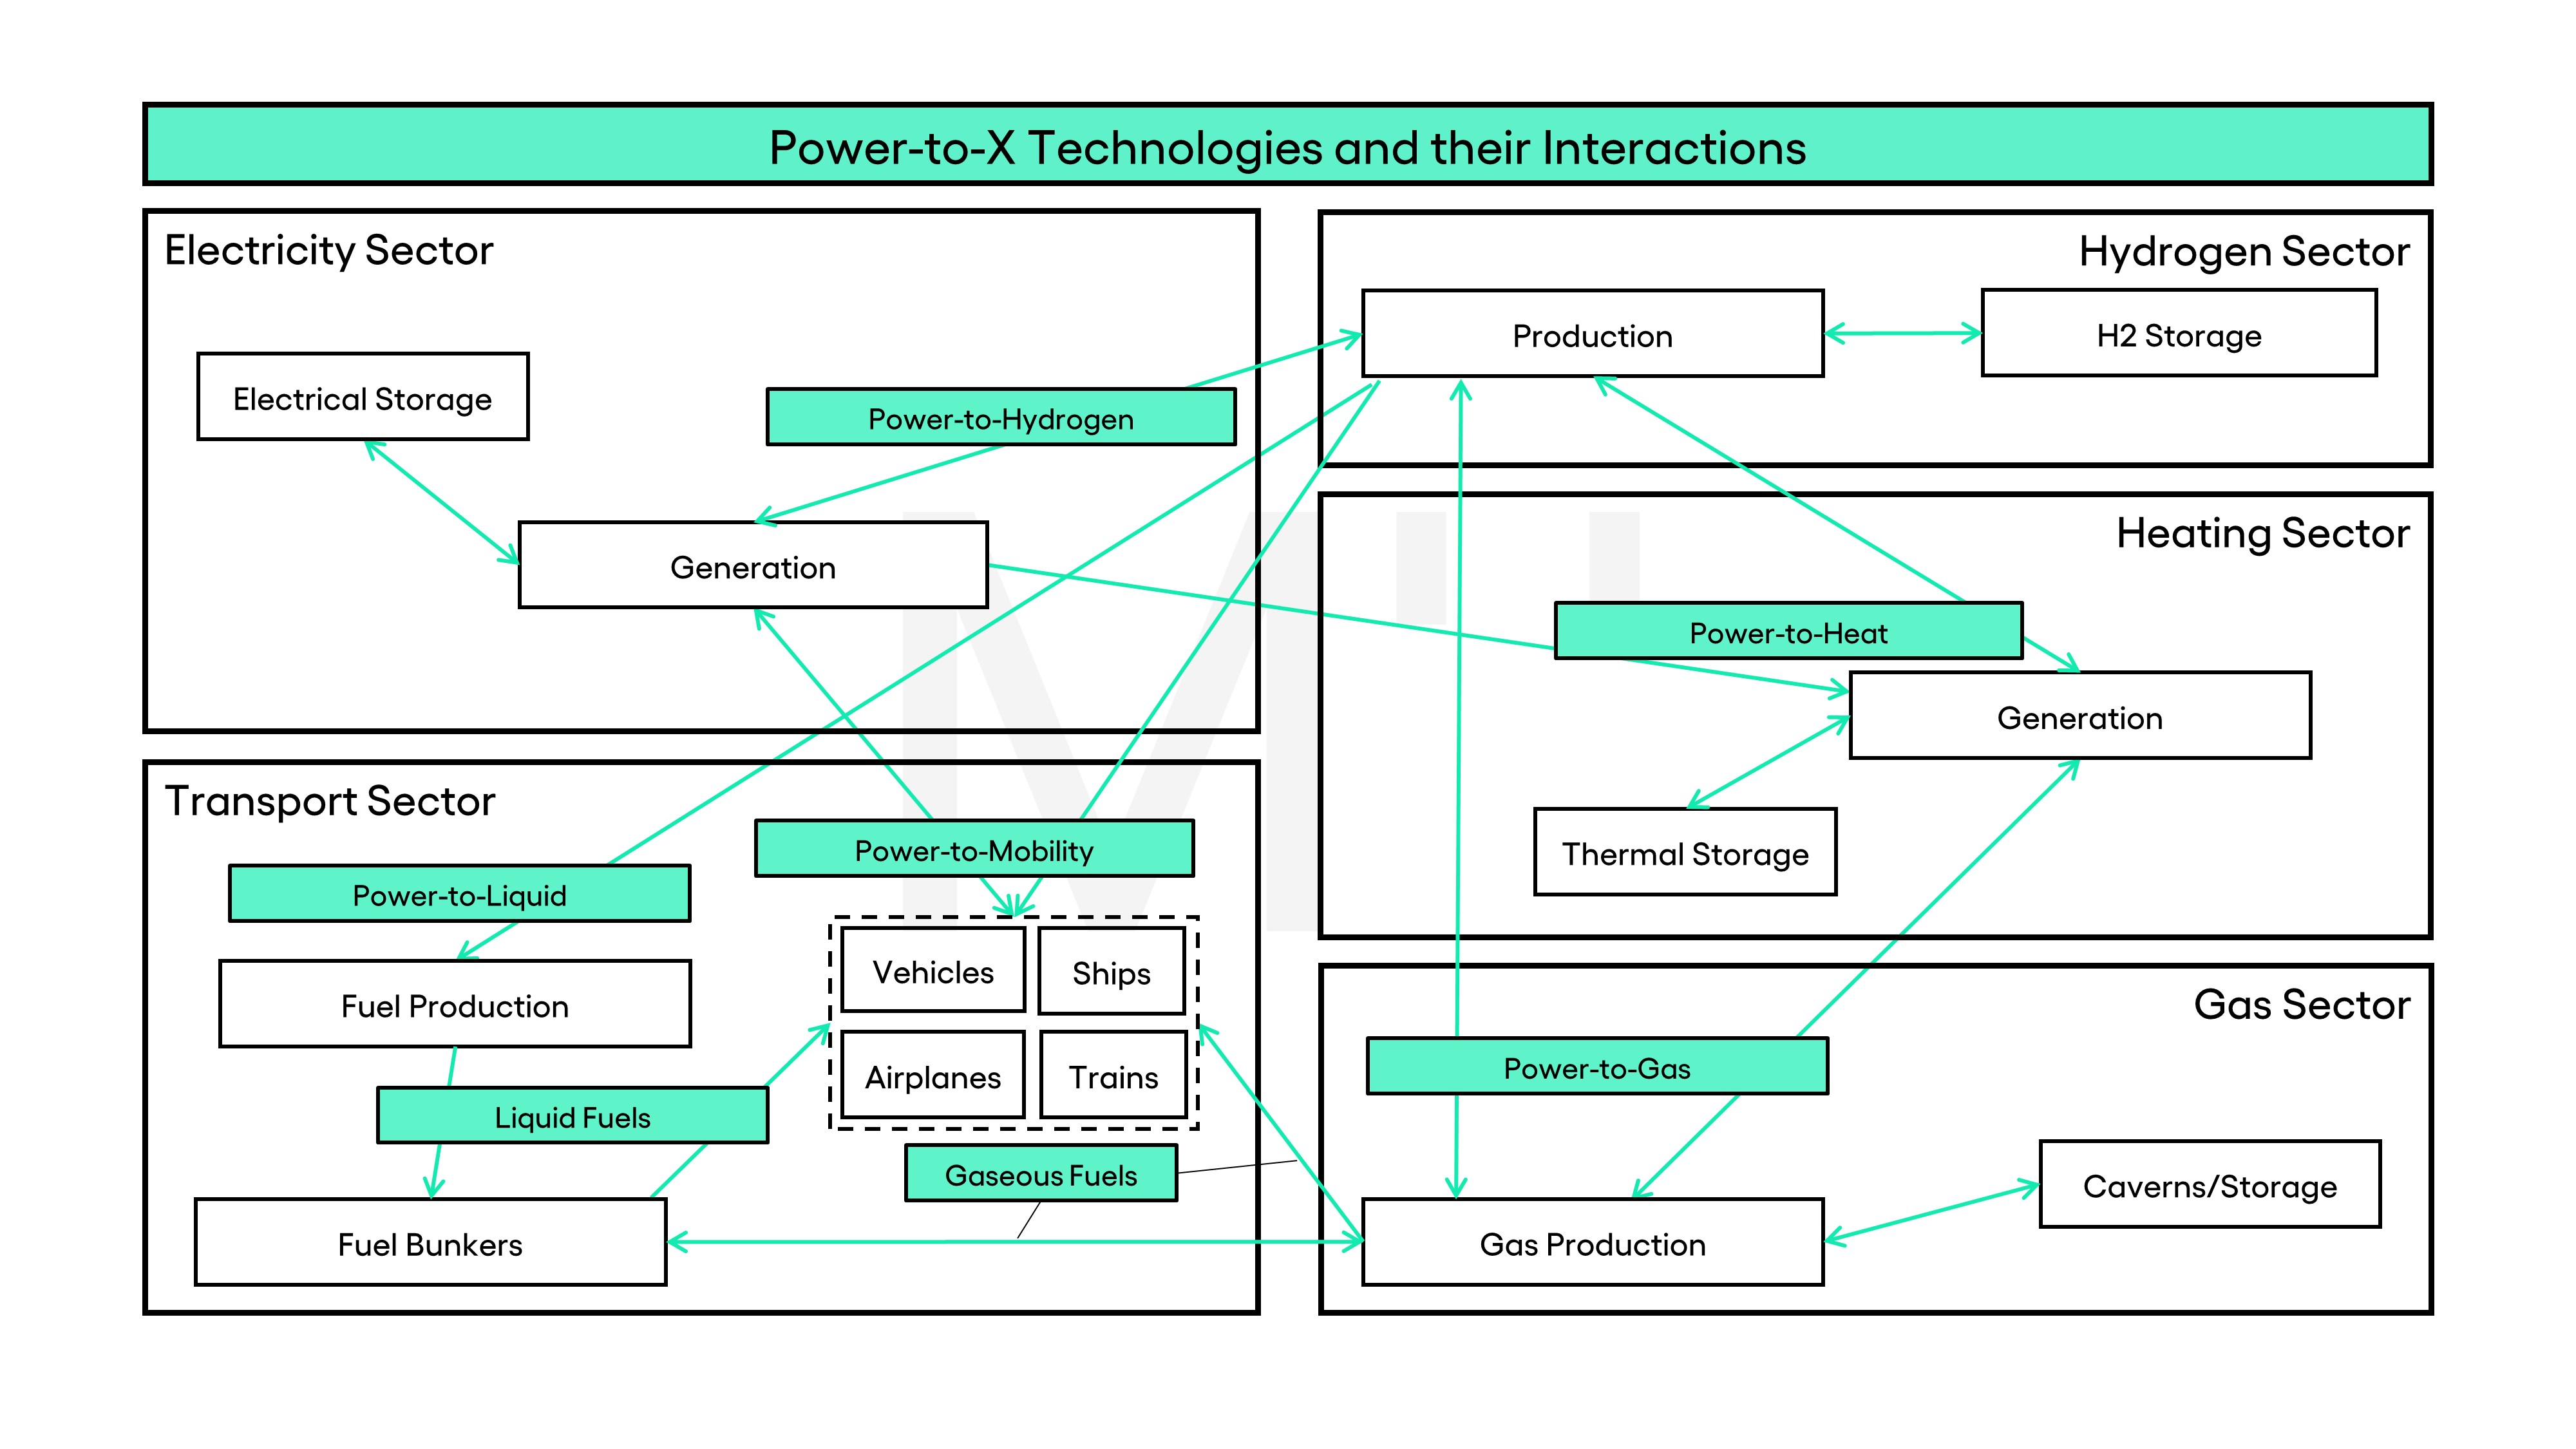 Visualization: Power-to-X and Their Interactions